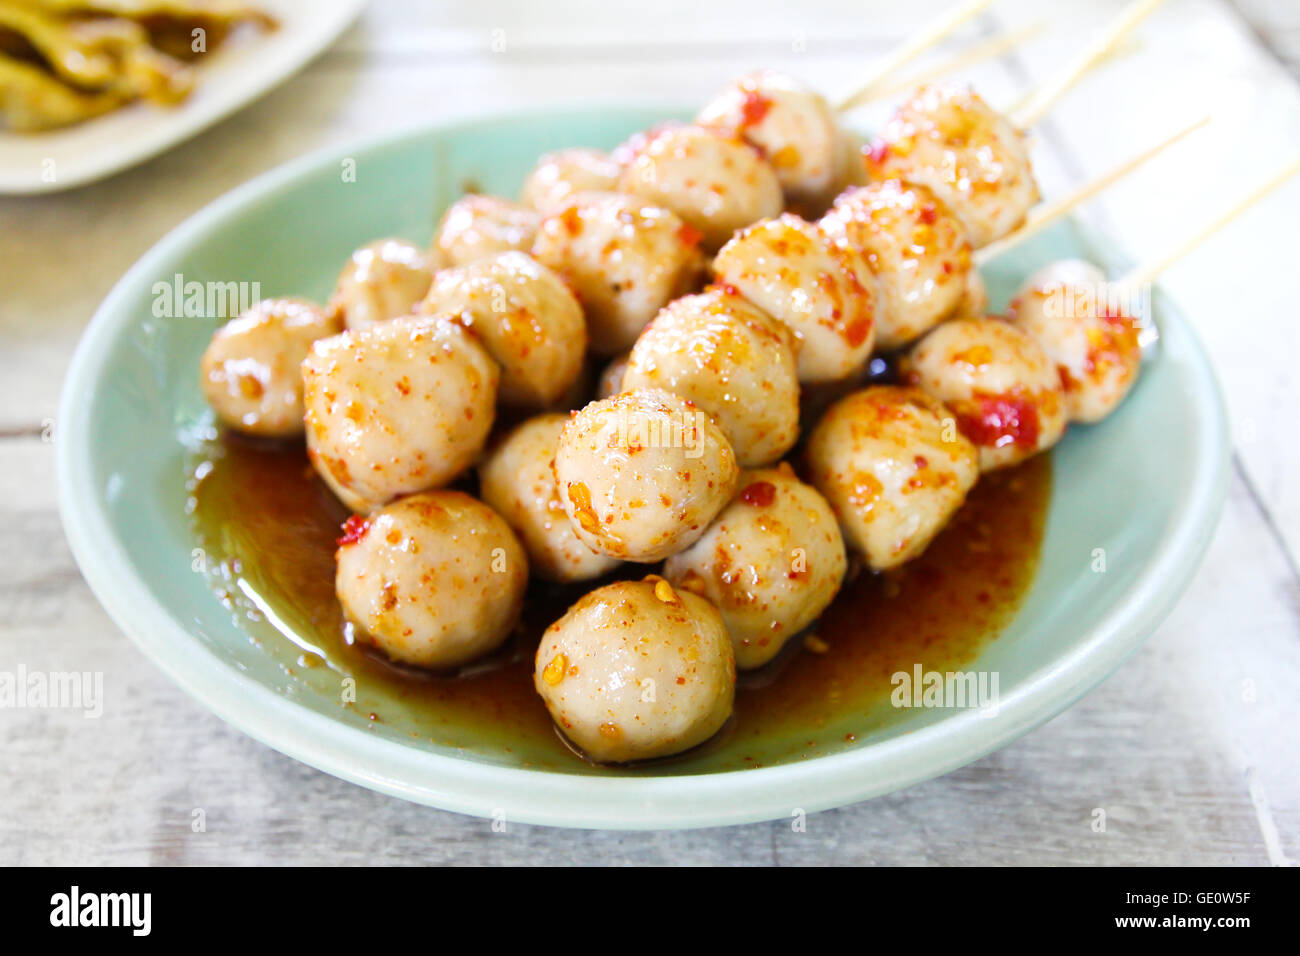 Grilled meat ball with sweet and spicy sauce Stock Photo